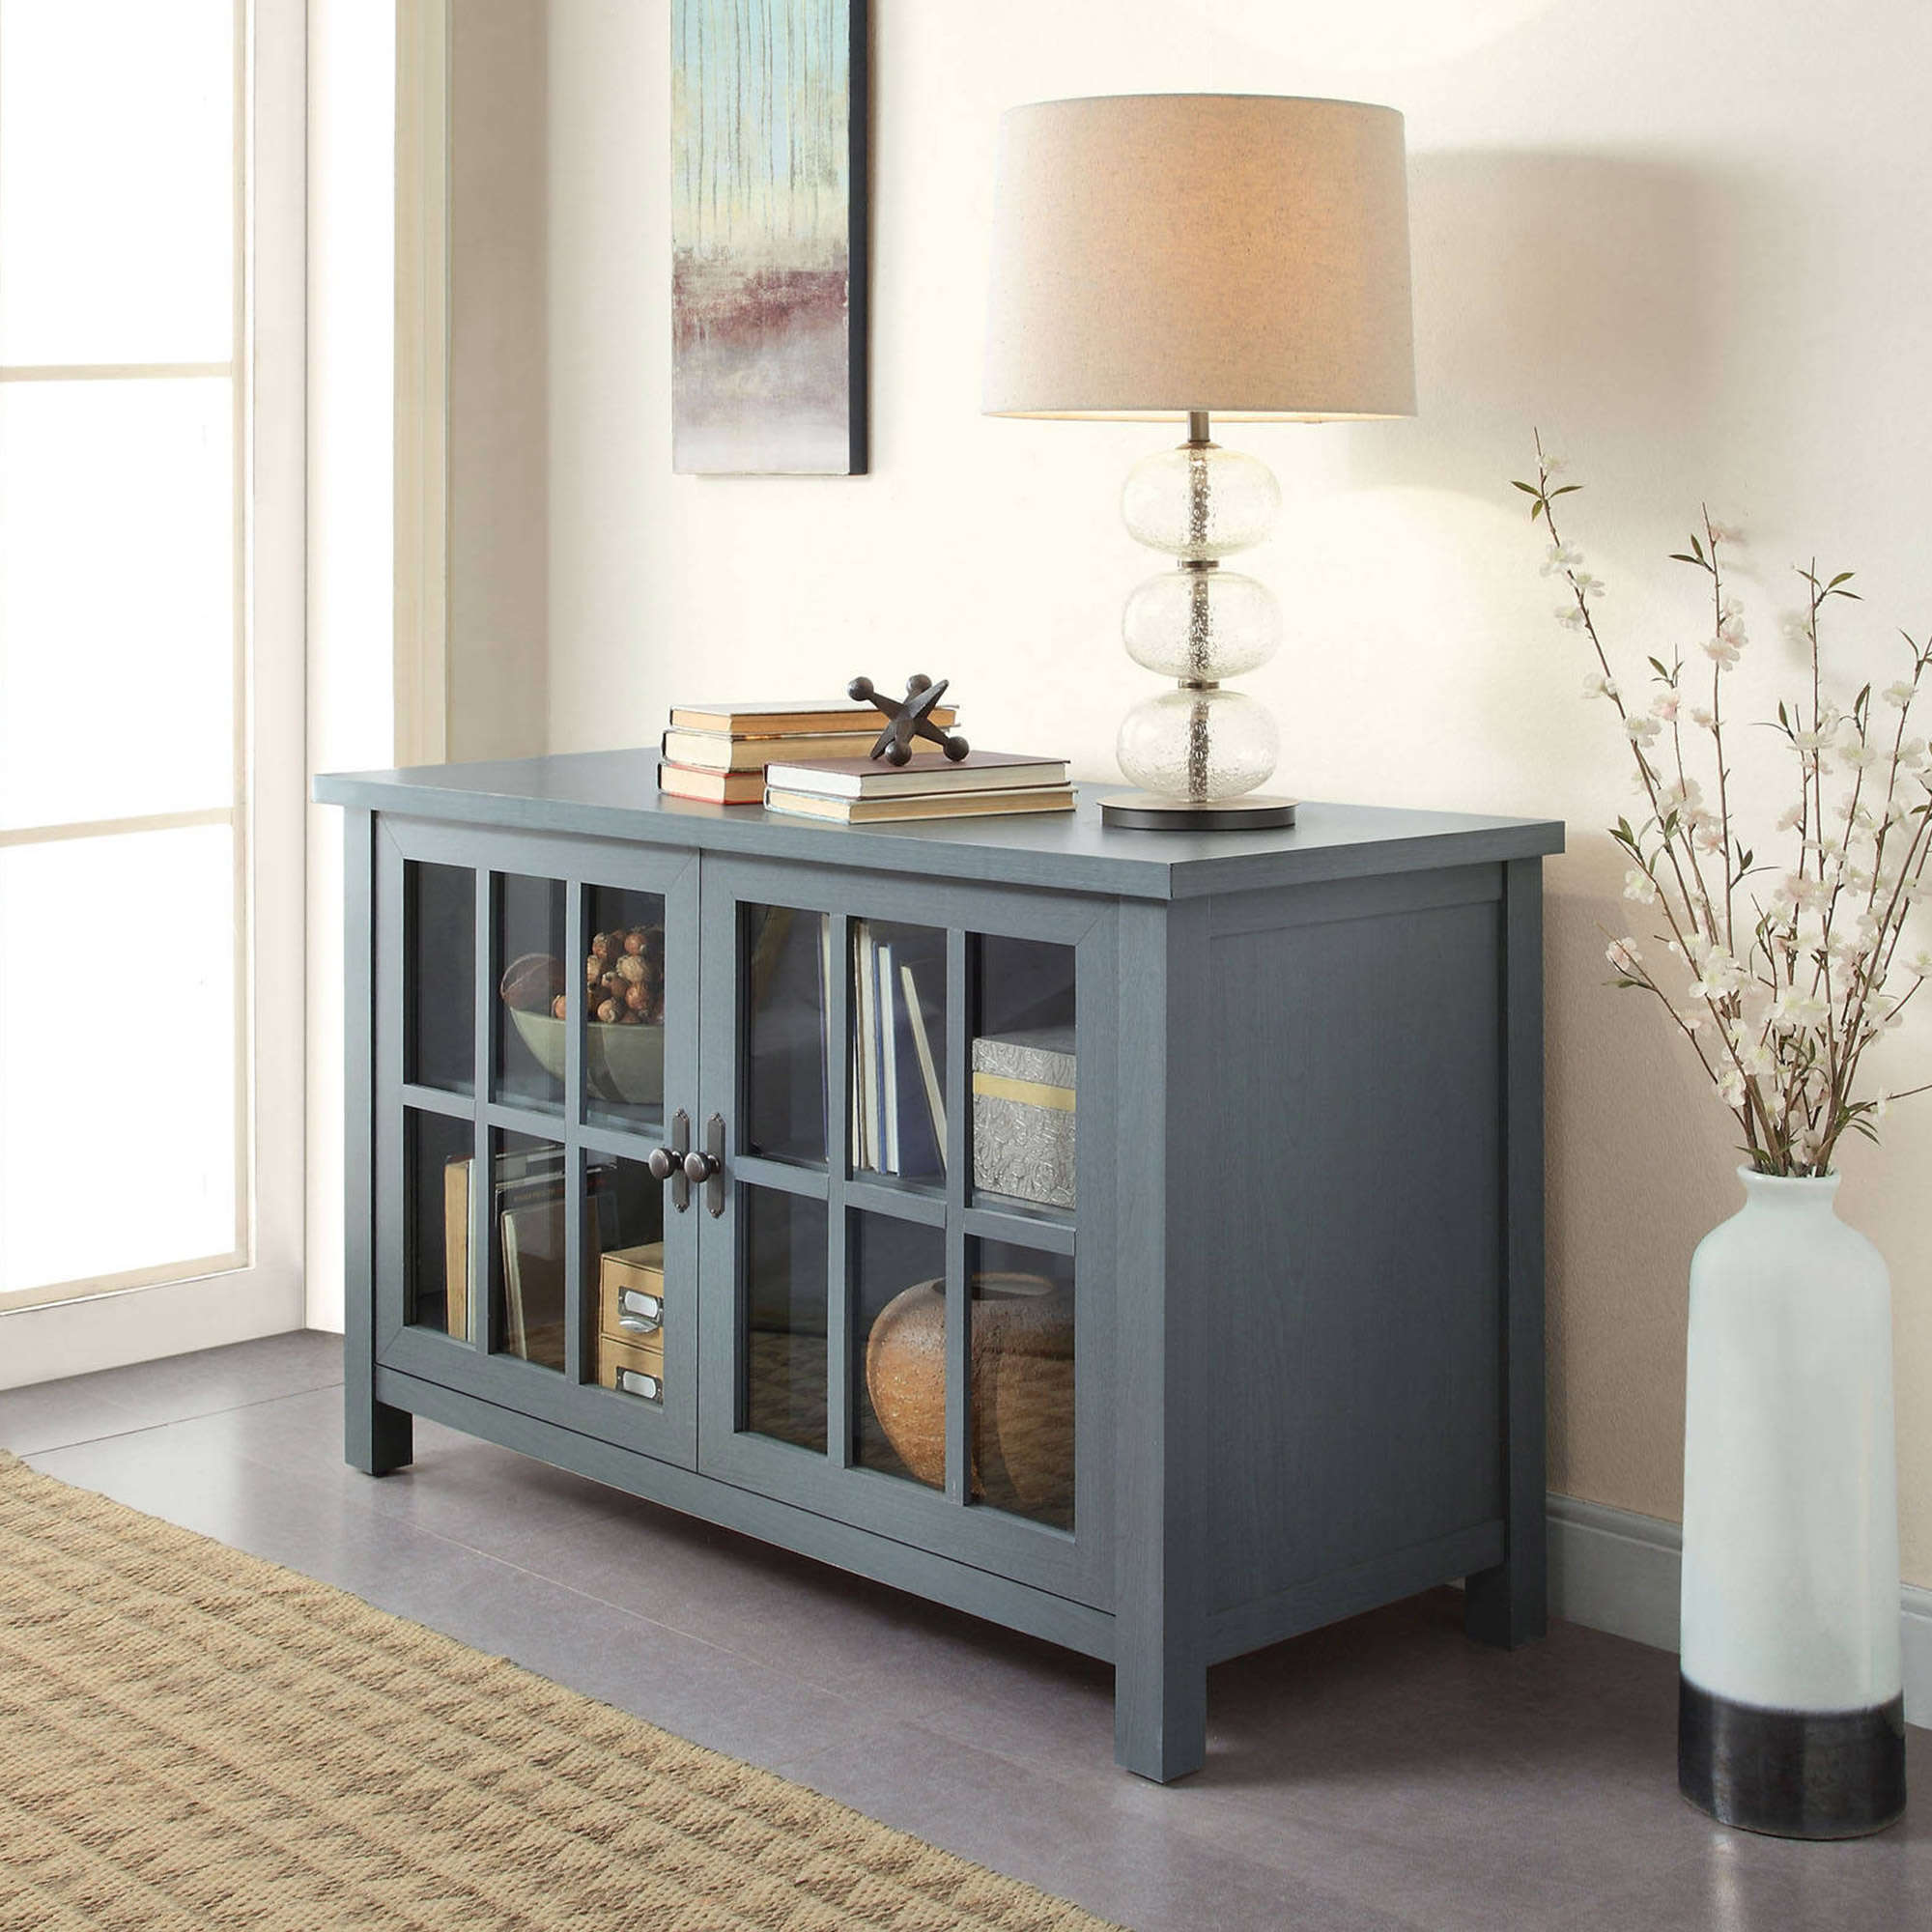 Better Homes & Gardens Oxford Square TV Stand for TVs up to 55", Antique Blue - image 3 of 7